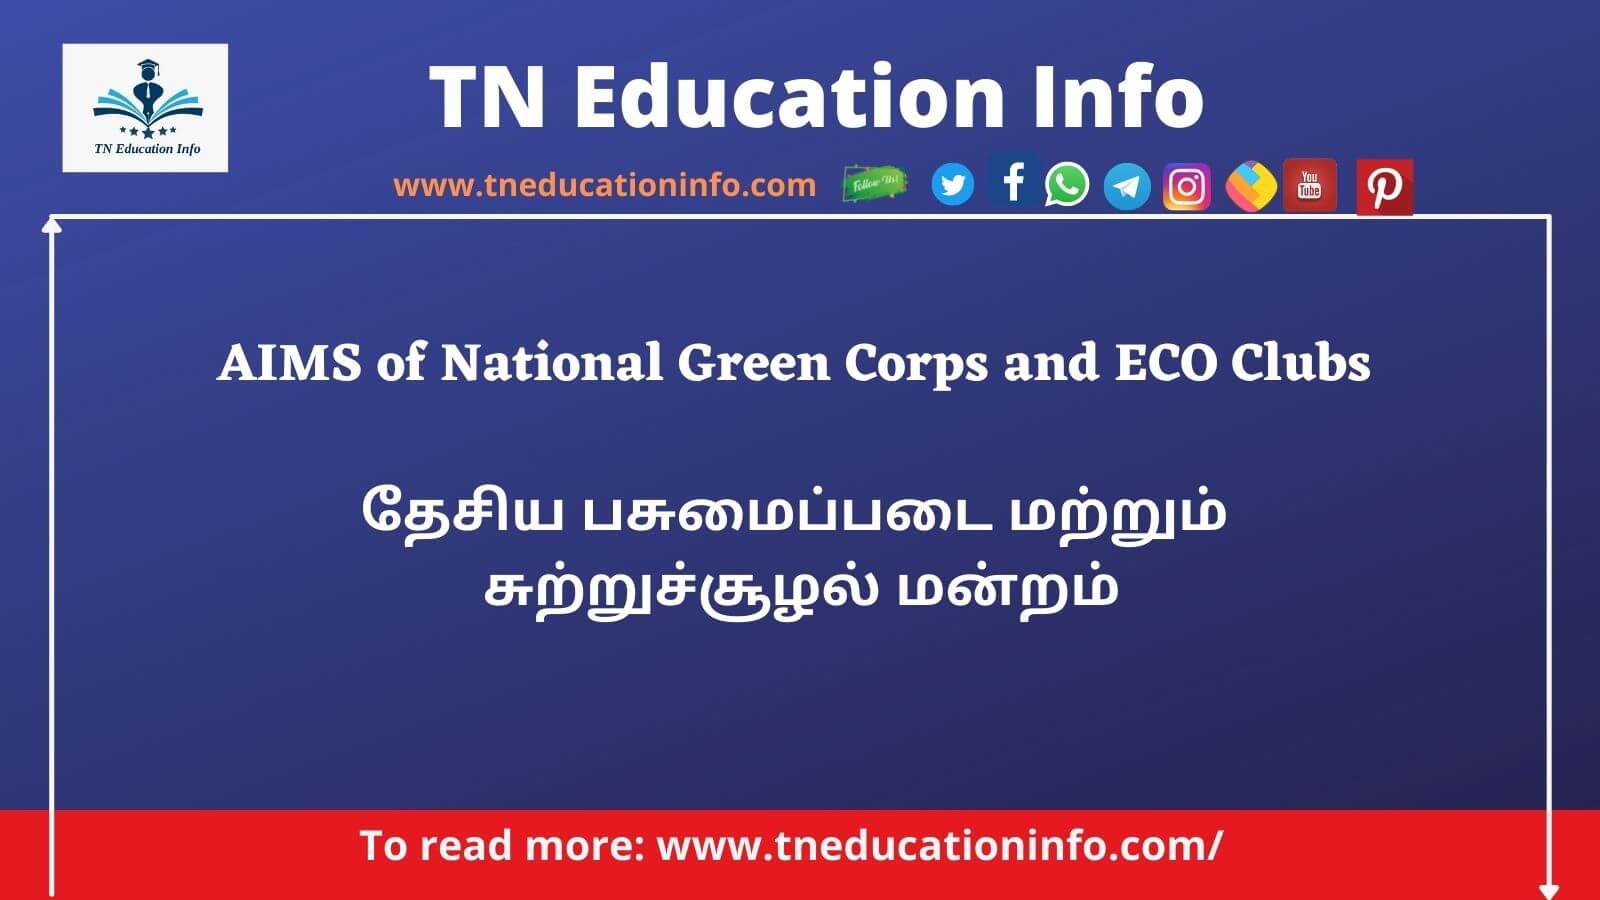 IAS - Our Dream - National Green Corps 'Ecoclub' ▪︎Launched under the  Environment Education Awareness and Training (#EEAT), the National Green  Corps (#NGC) popularly known as “a #ProgrammeOfEcoclubs” is a nationwide  initiative